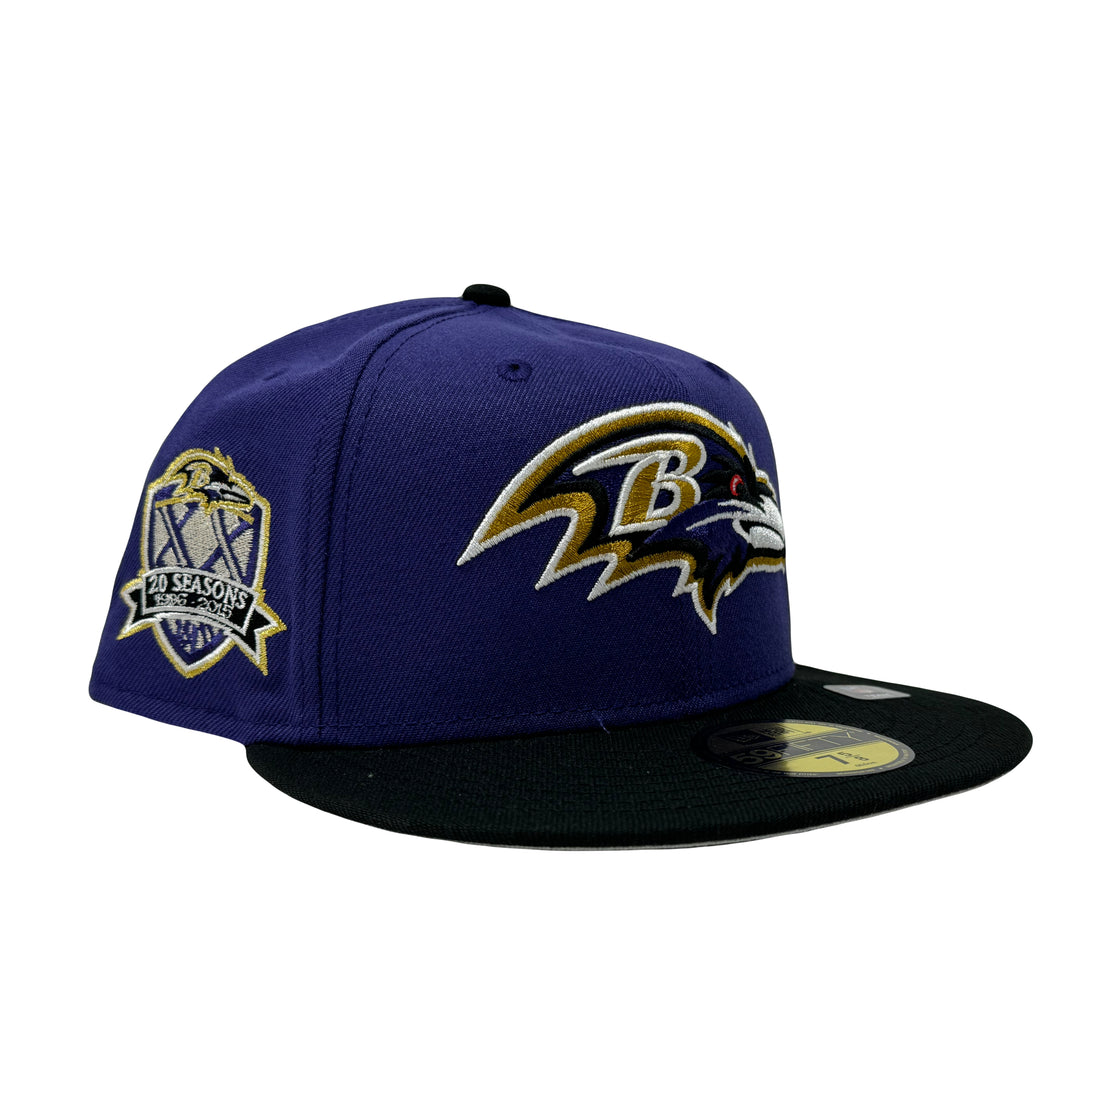 Baltimore Ravens 20th Anniversary NFL 5950 New Era Fitted Hat